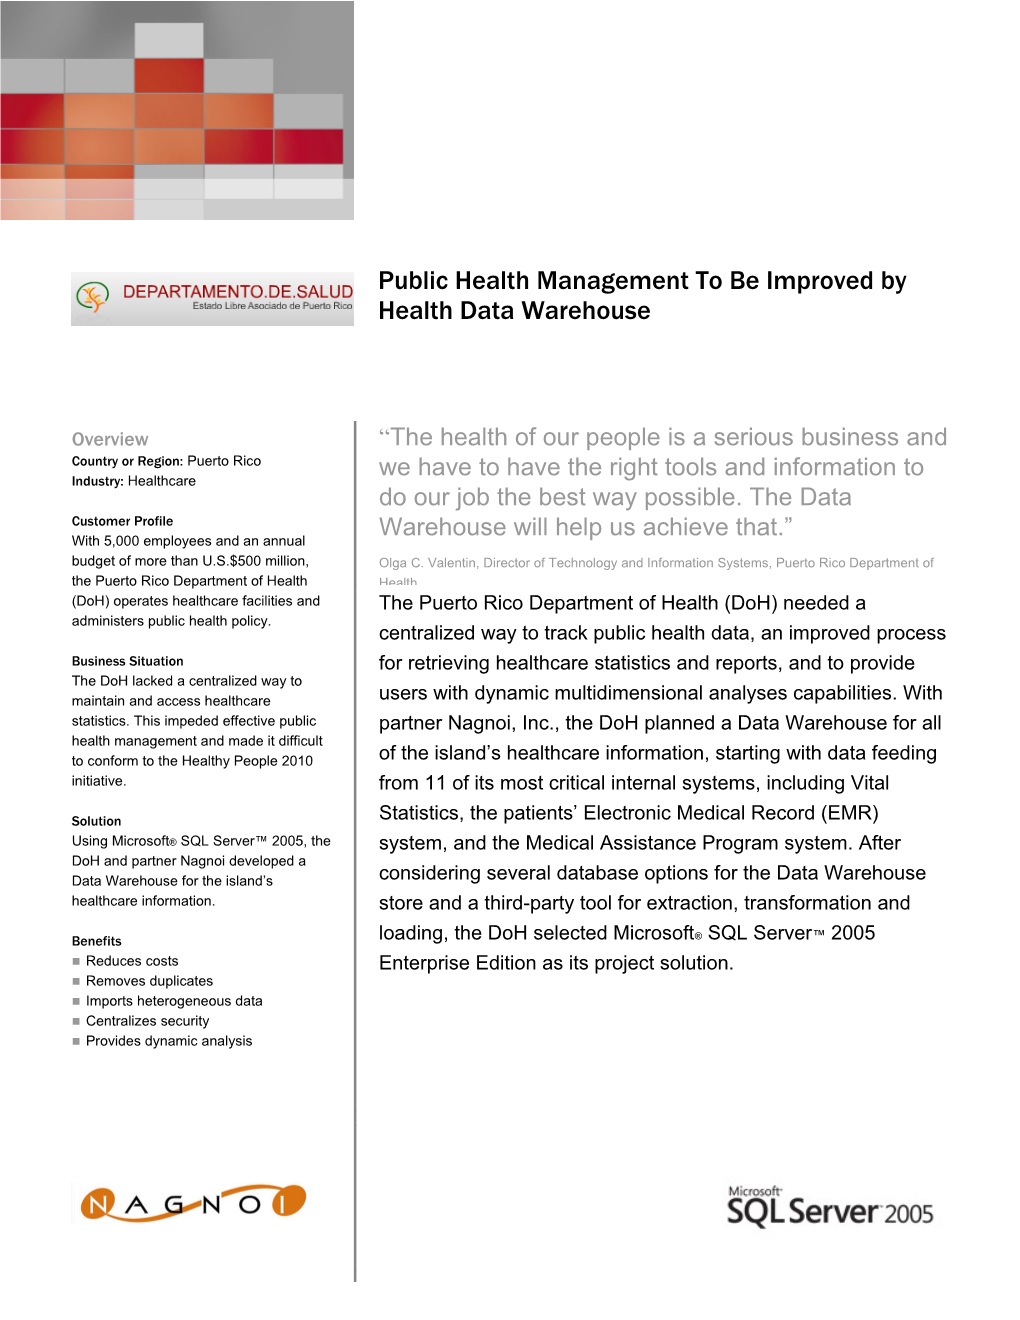 Public Health Management to Be Improved by Health Data Warehouse